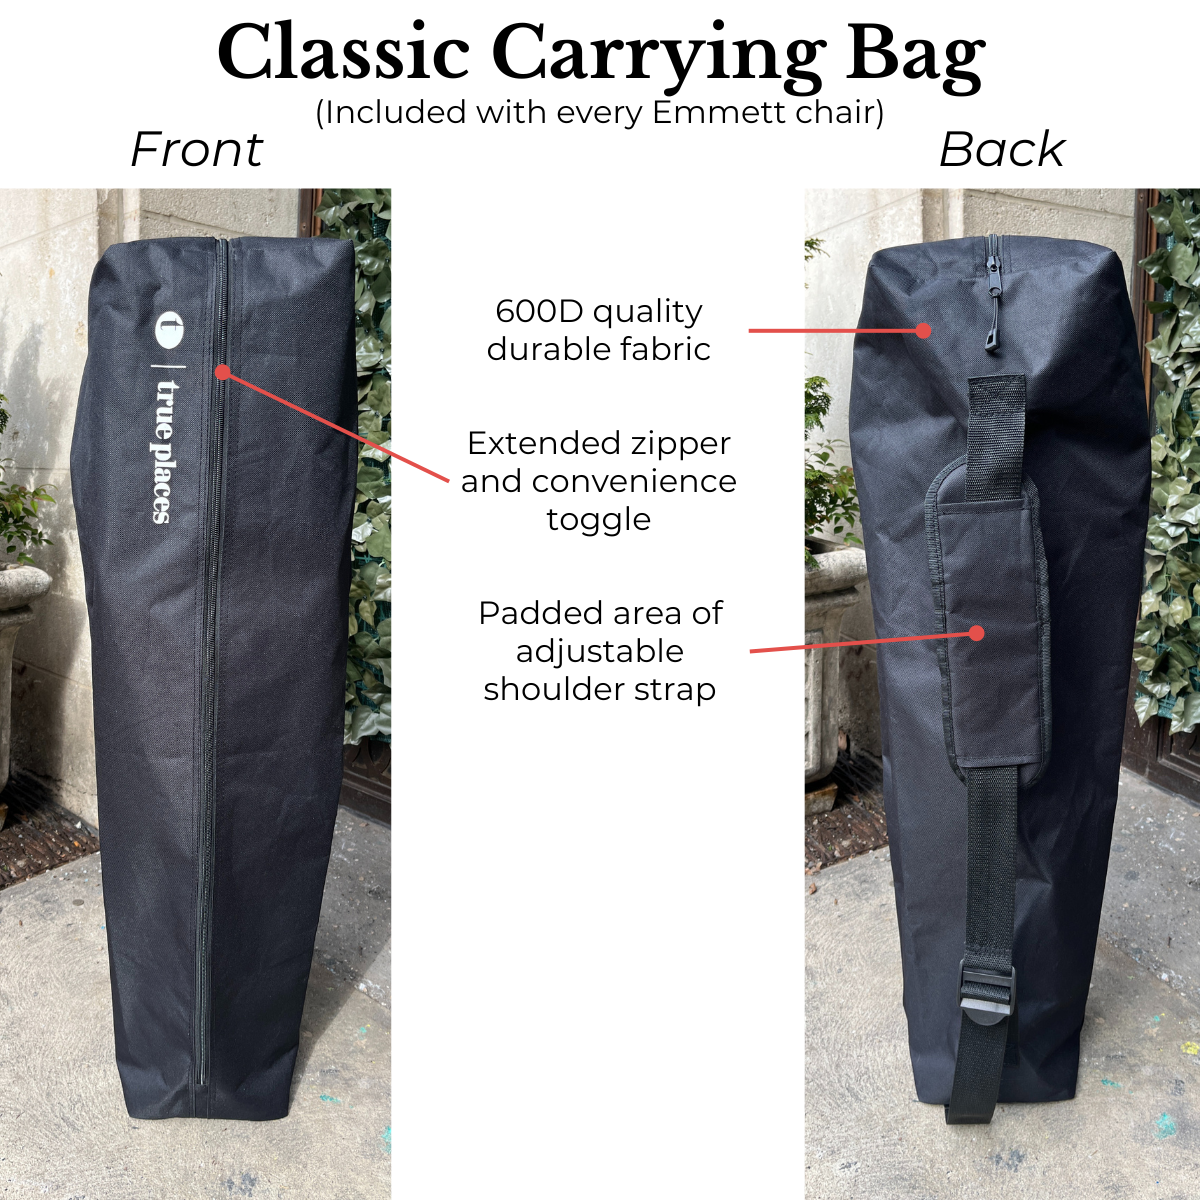 Classic Carrying Bag for the True Places Emmett Portable Chair easy portability and high quality custom designed bag and padded strap for the best camping chair, firepit chair, sidelines chair